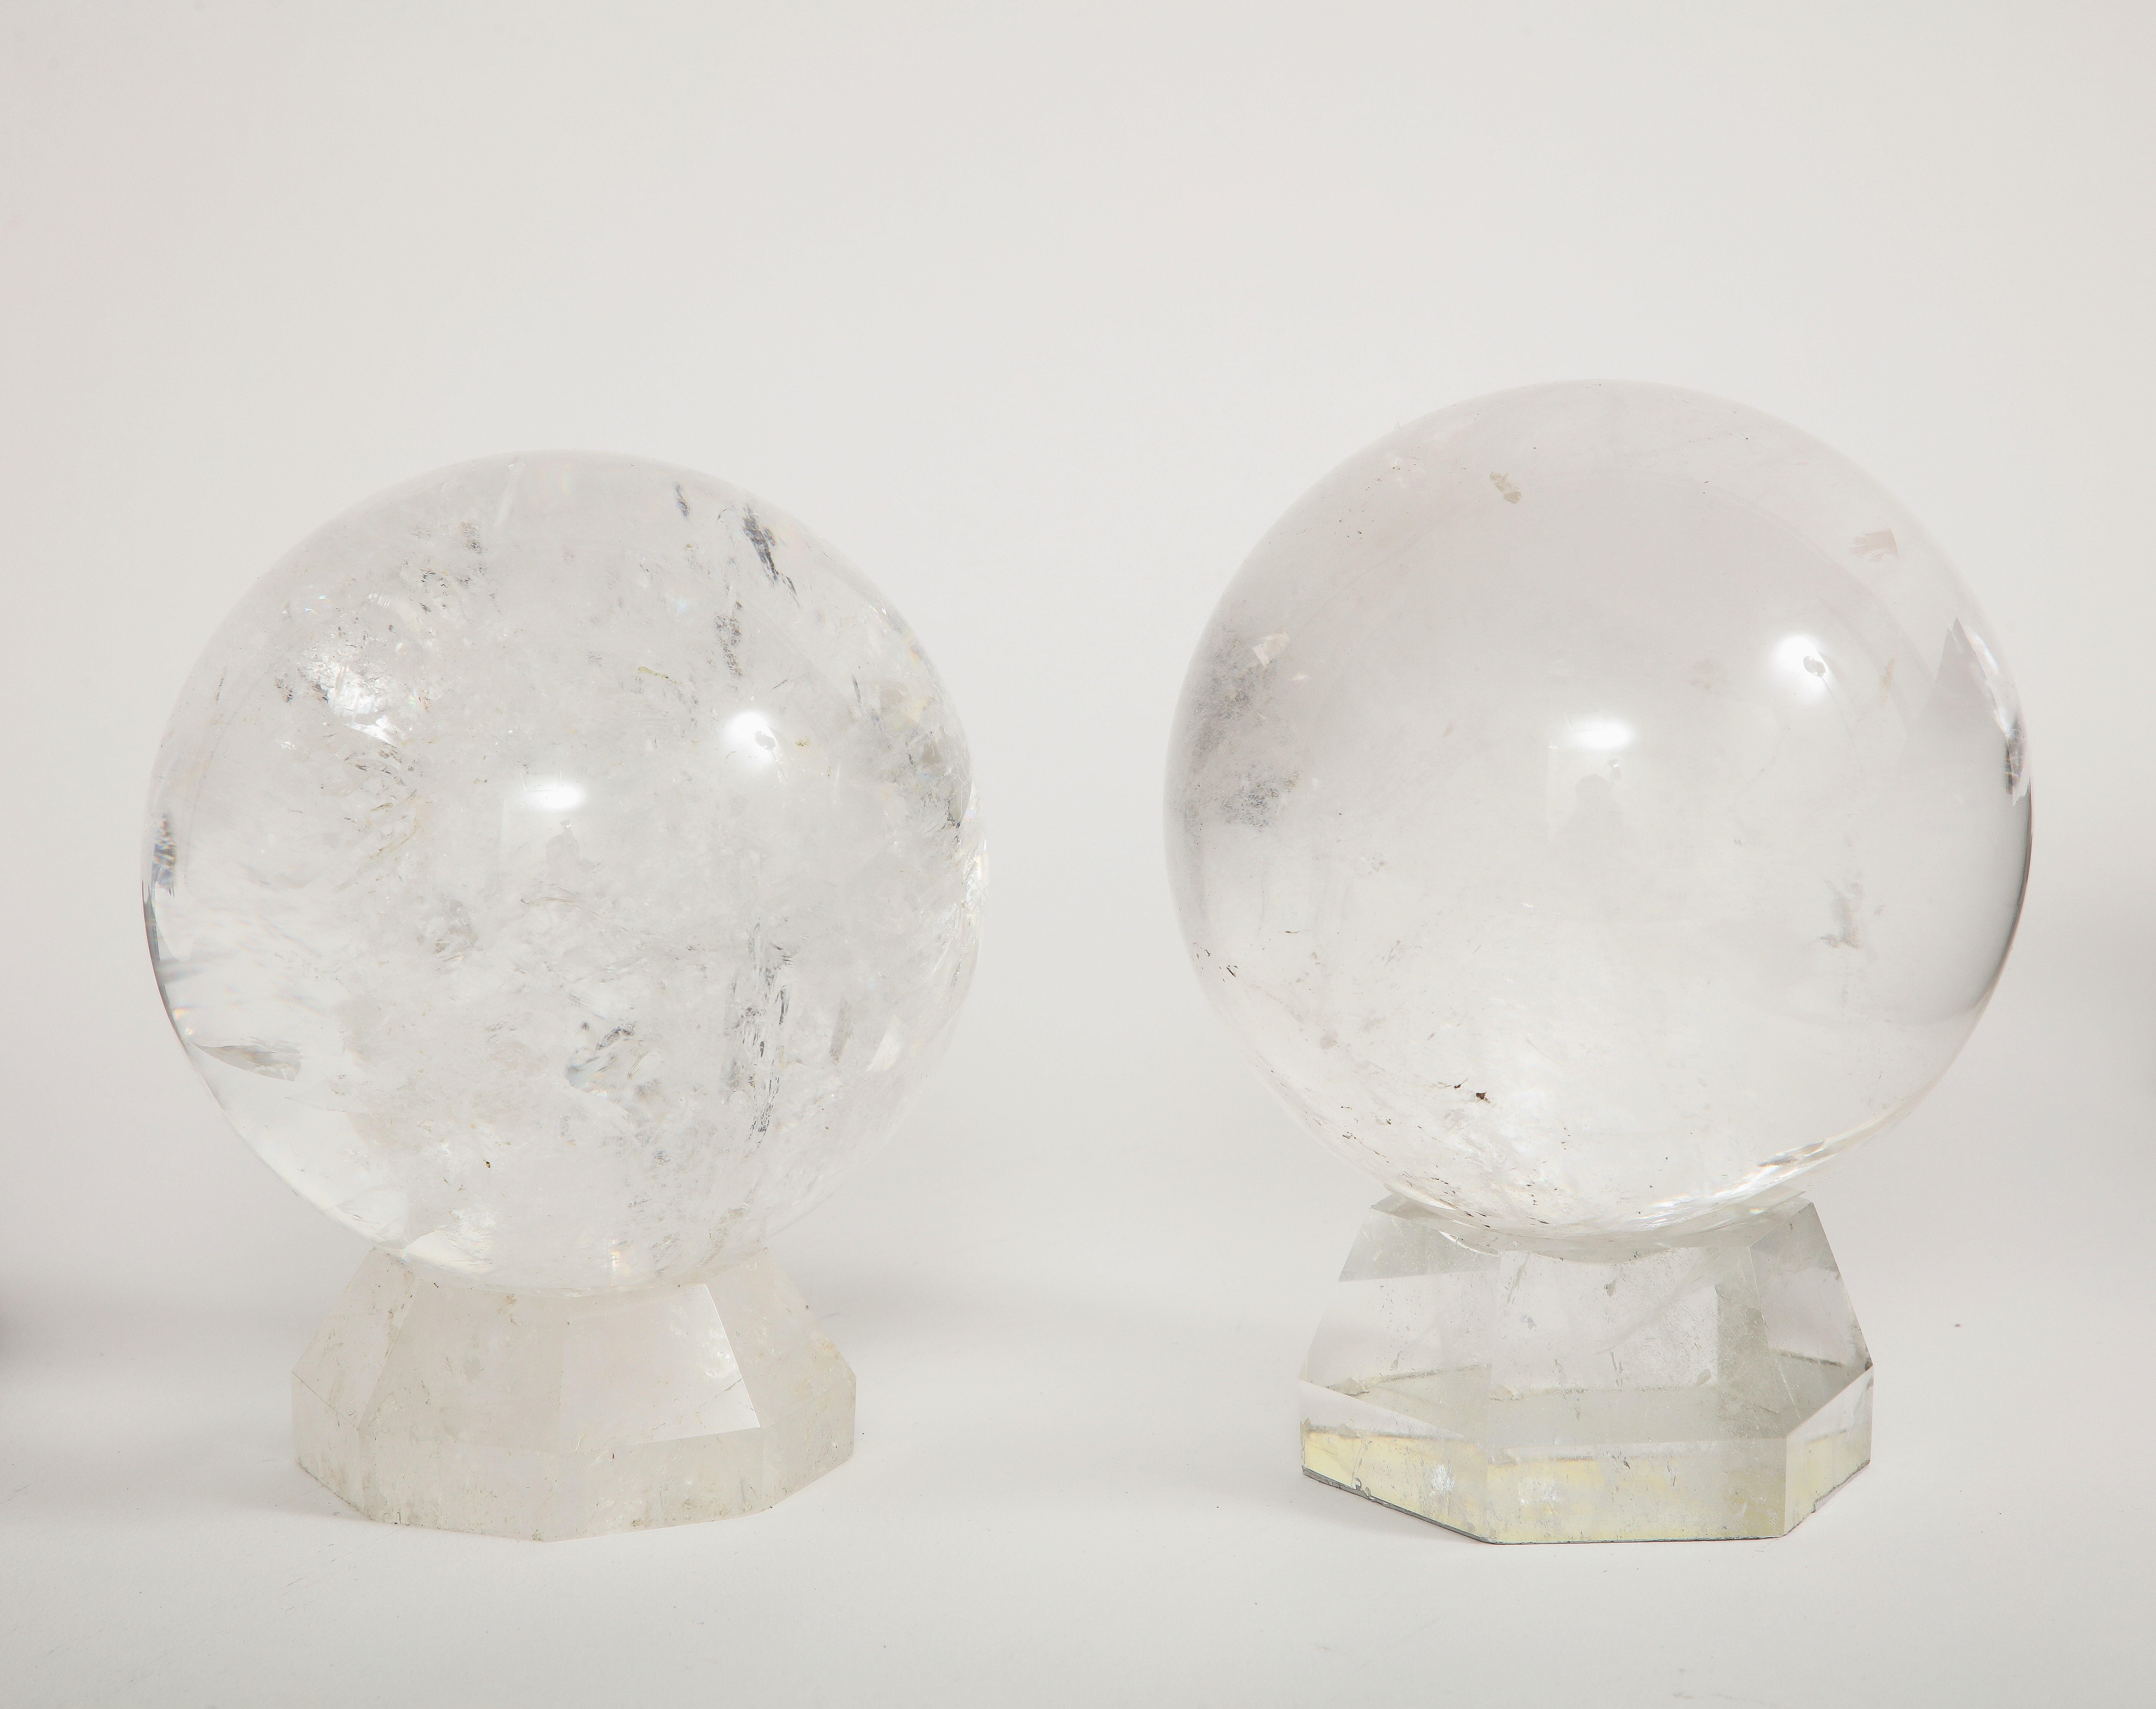 A Pair of French Mid-Century Modern rock crystal hand-craved and hand-polished orbs/spheres on original rock crystal stands. Each orb is hand carved and hand-polished from a single piece of very clear natural rock crystal. The orbs rest on two